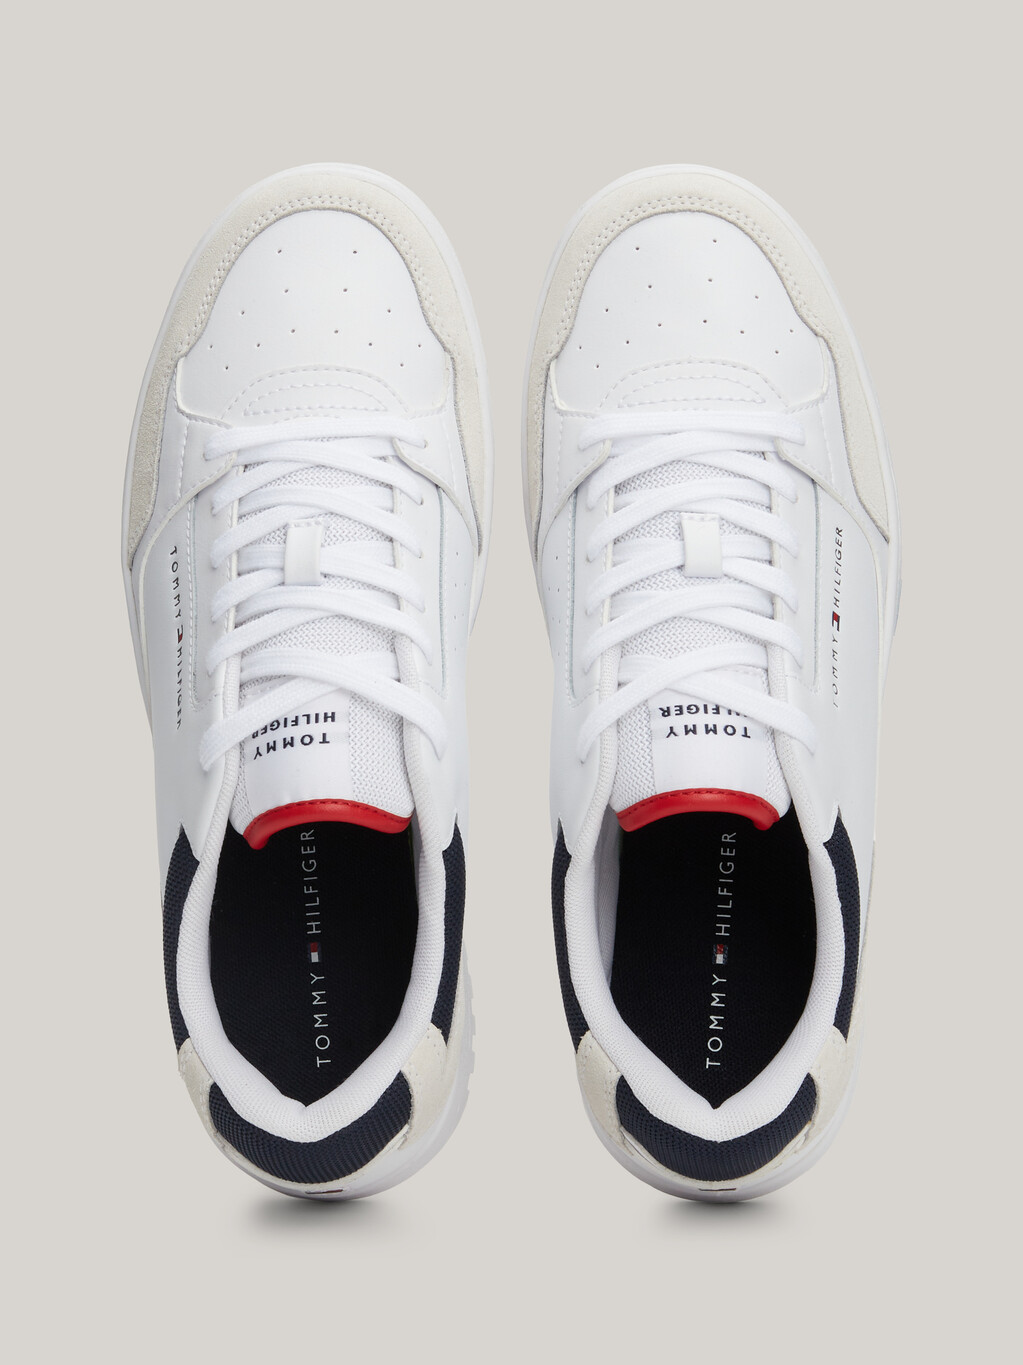 Essential Cleat Leather Basketball Trainers, White, hi-res